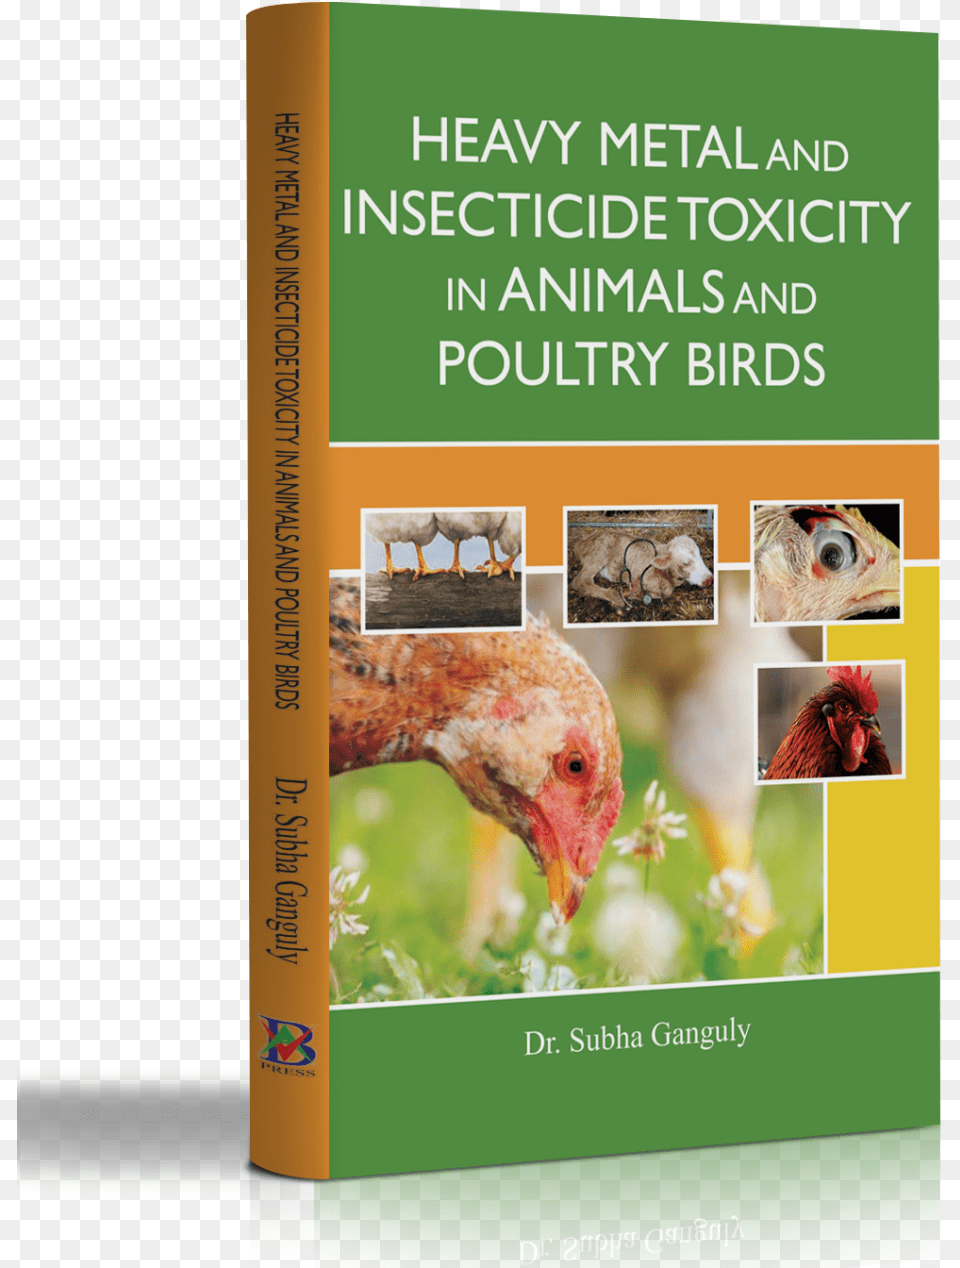 Heavy Metal And Insecticide Toxicity In Animals And Flyer, Animal, Bird, Chicken, Fowl Free Transparent Png